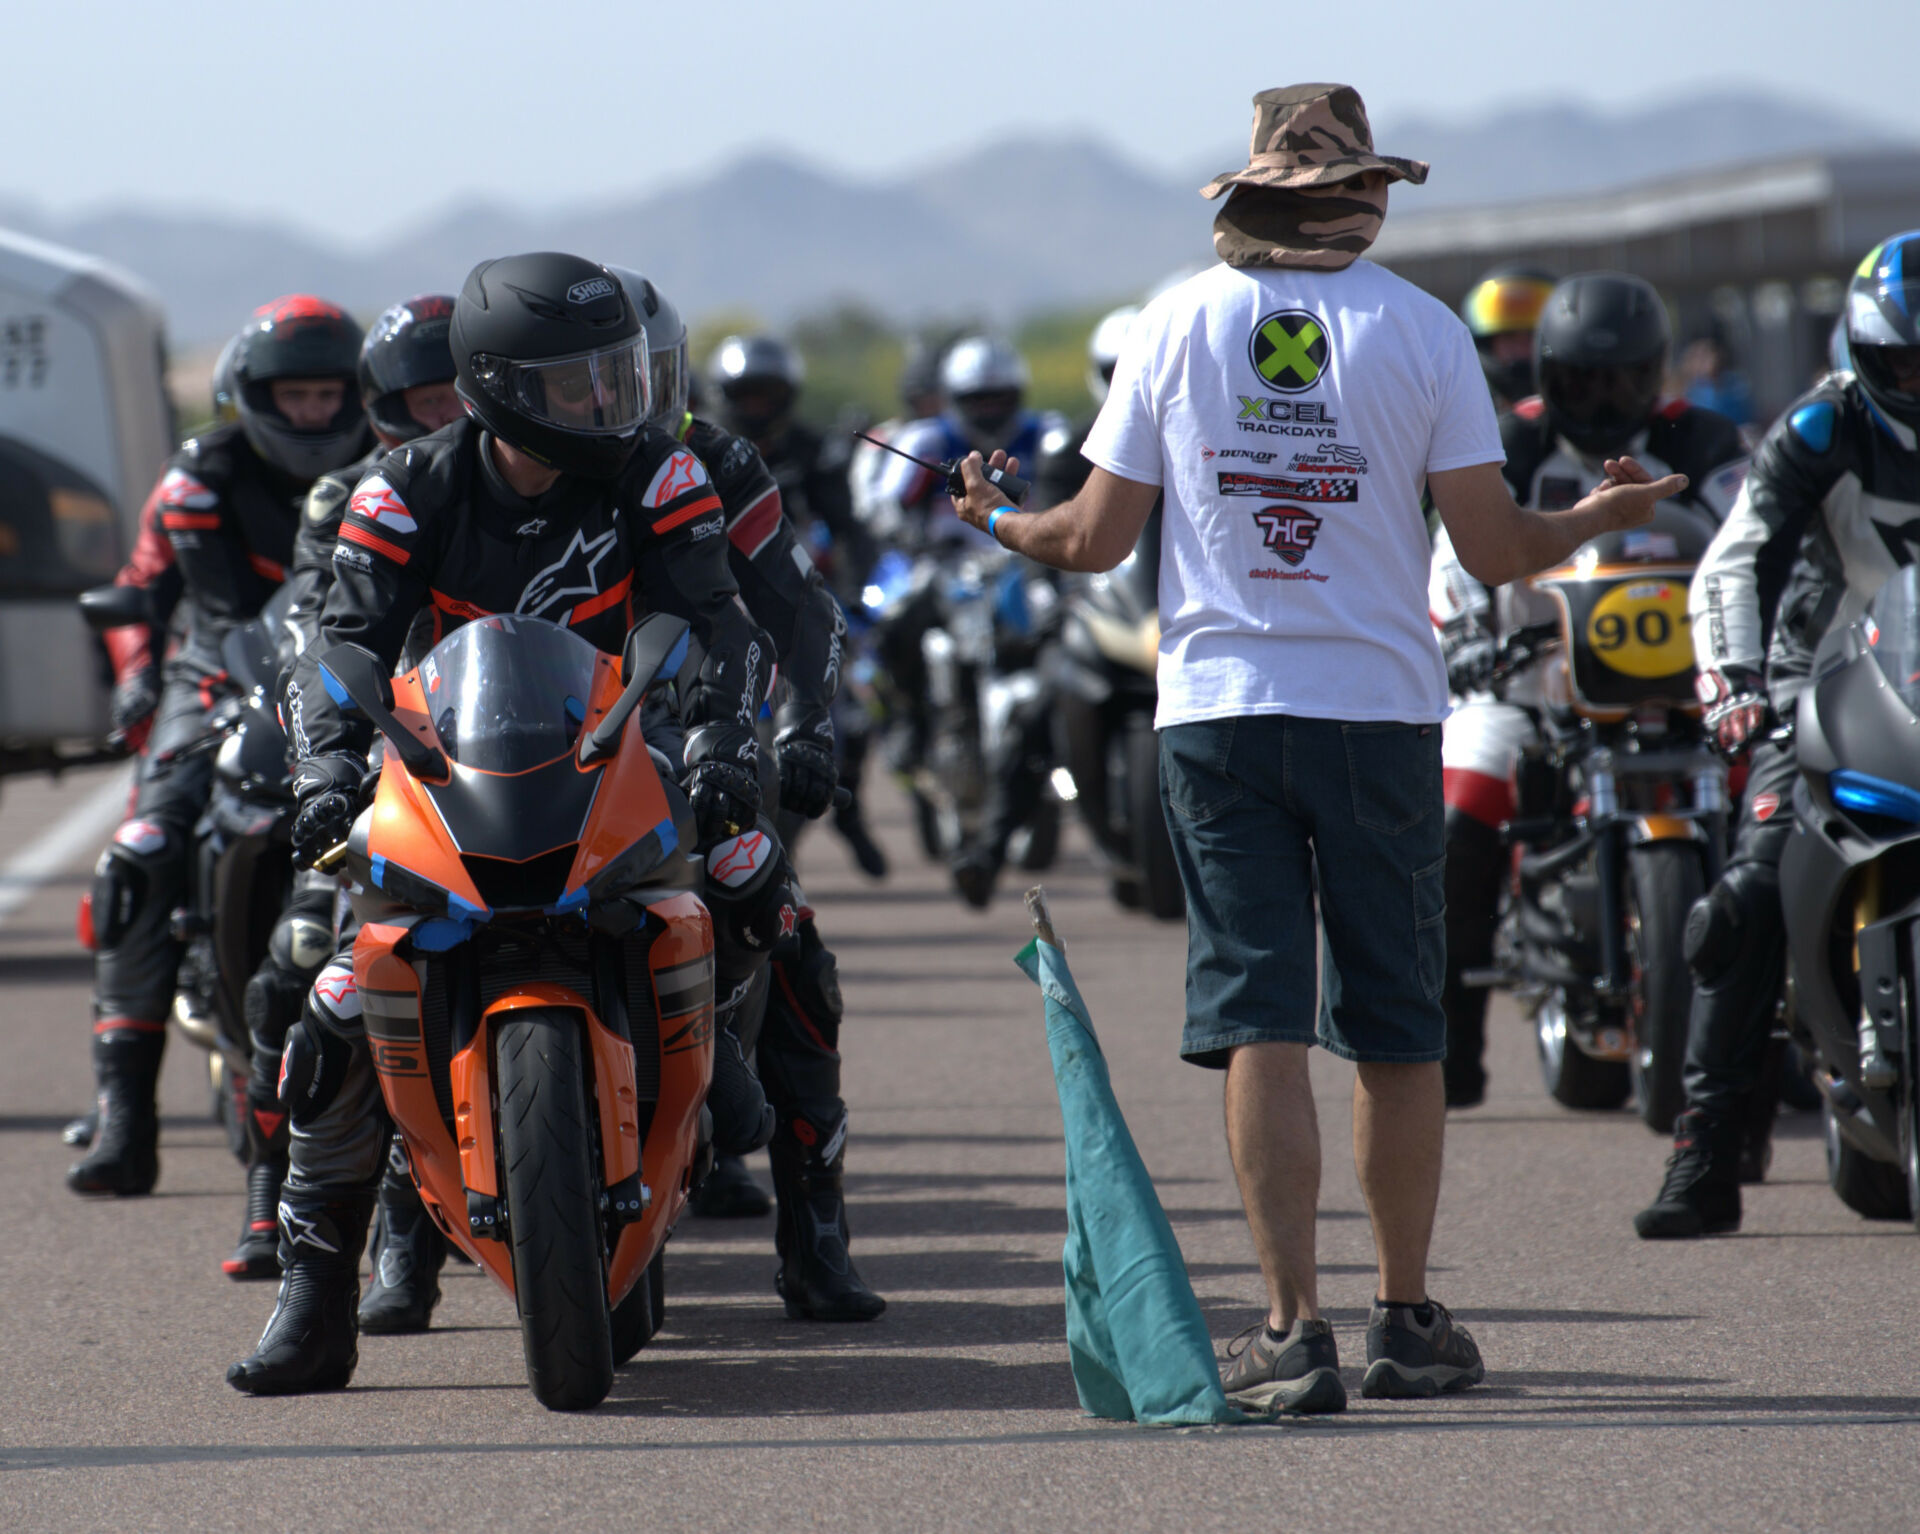 A scene from an XCEL Trackdays event. Photo courtesy XCEL Trackdays.